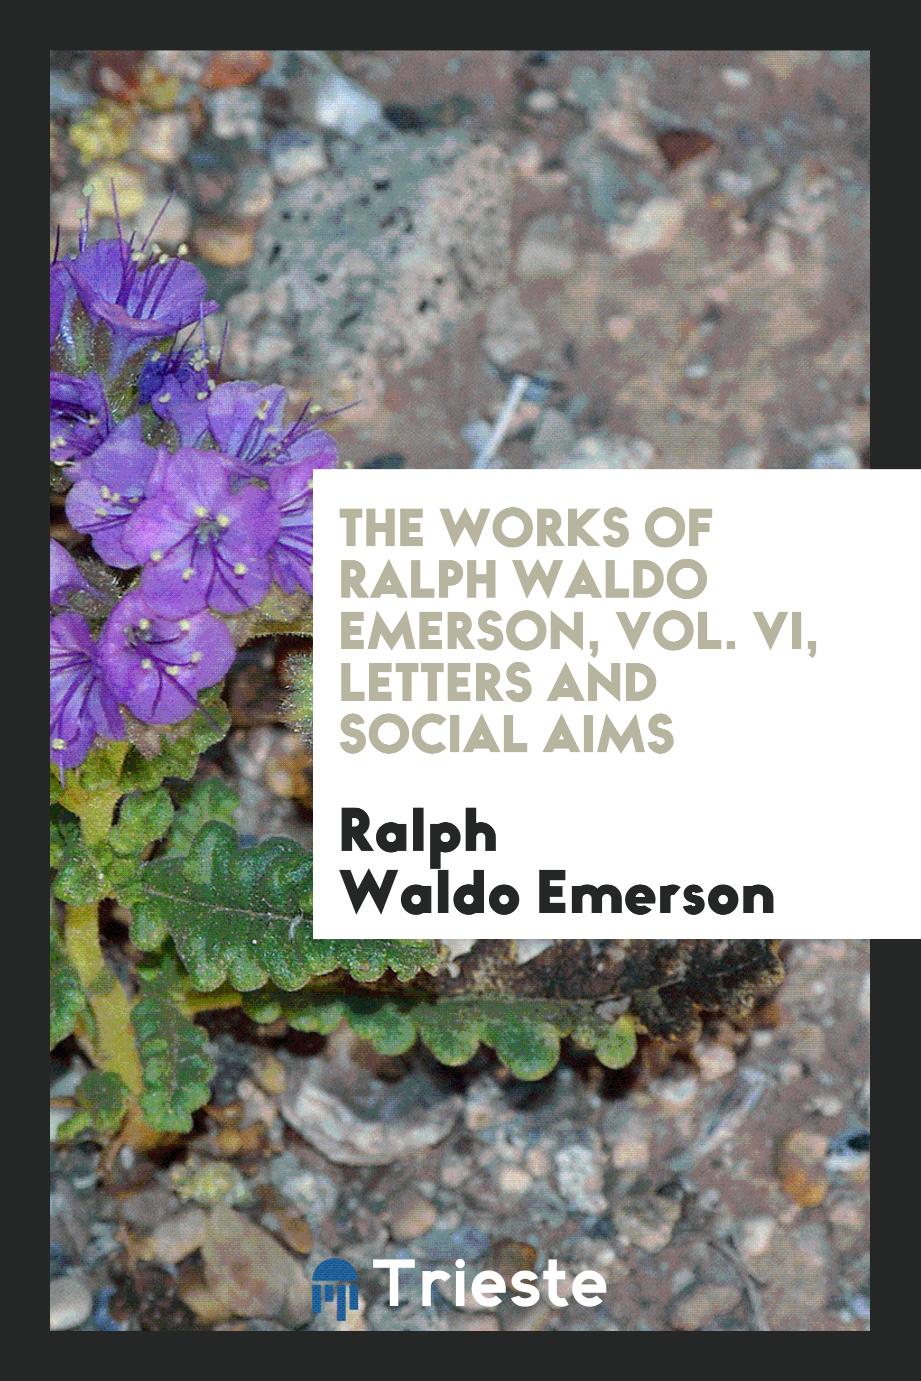 The works of Ralph Waldo Emerson, Vol. VI, Letters and social aims